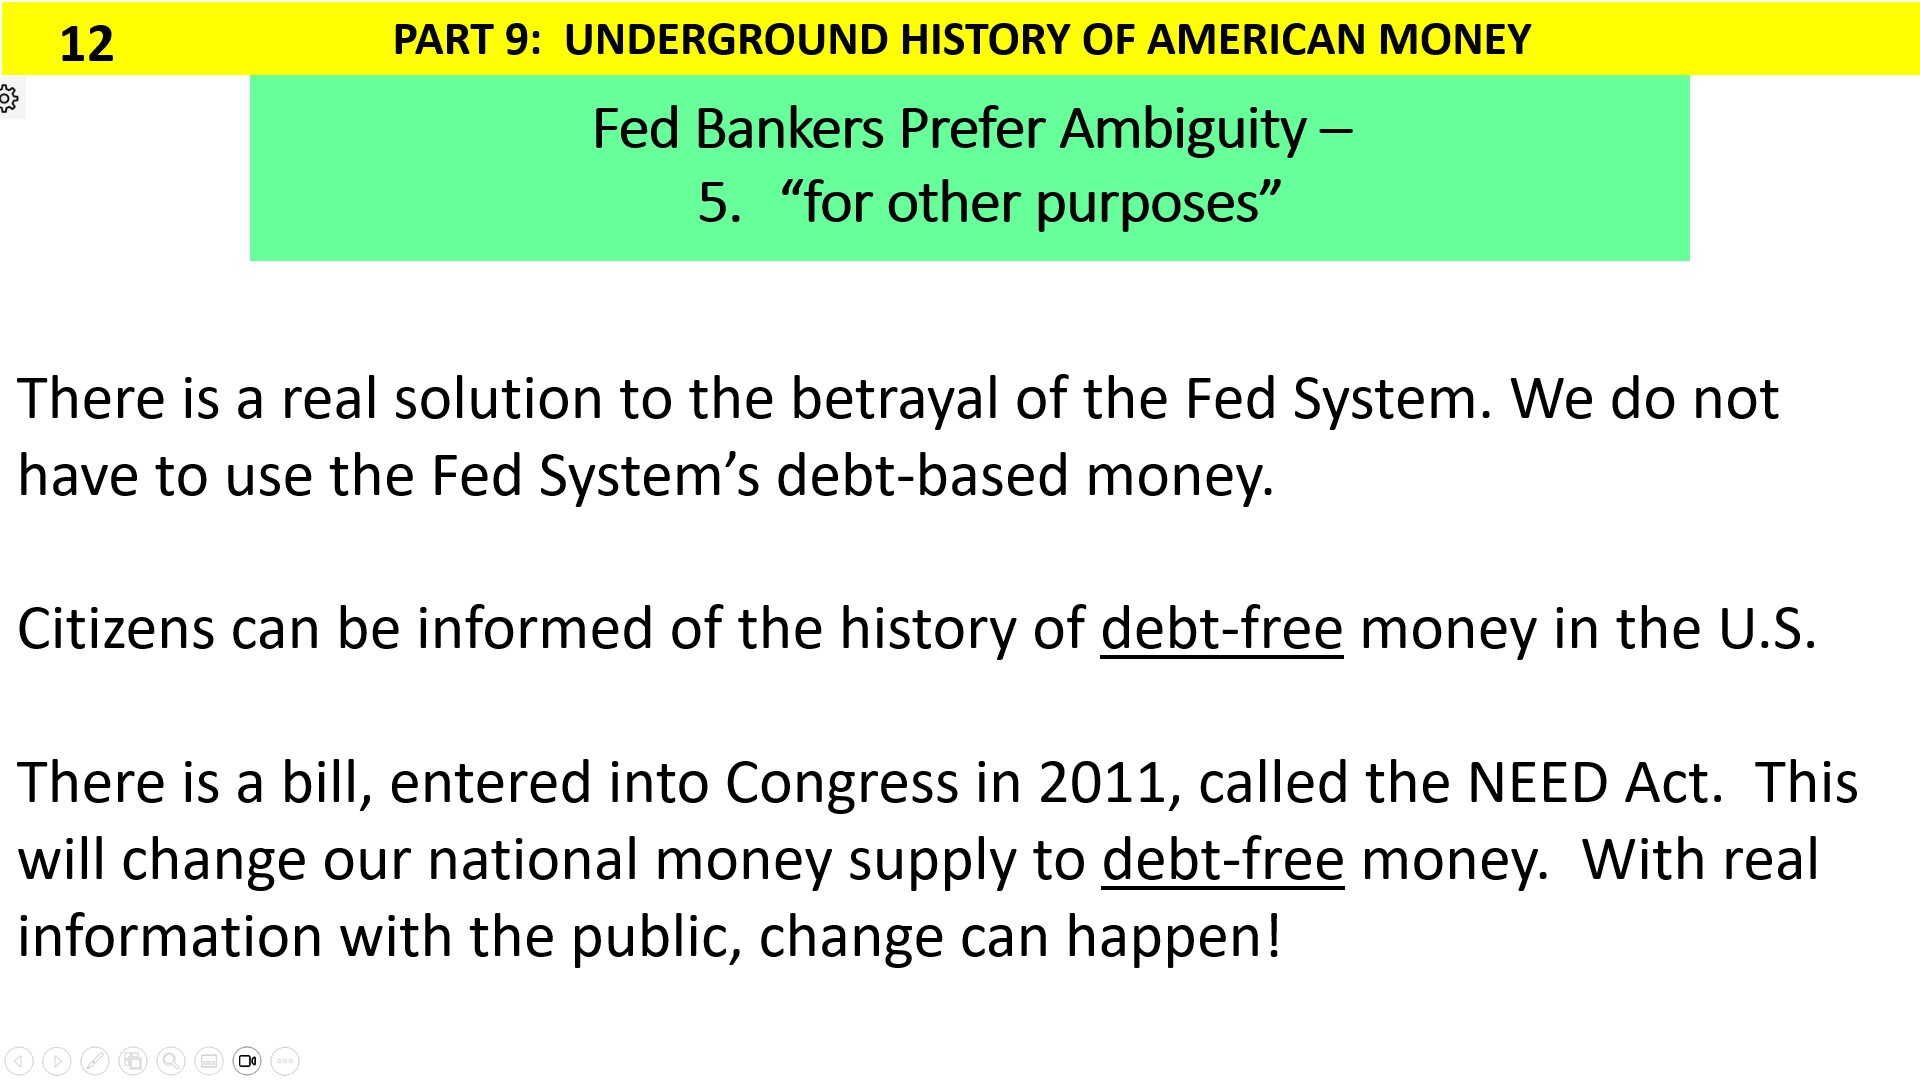 The Federal Reserve System -- Fed Bankers Prefer Ambiguity.  The End.